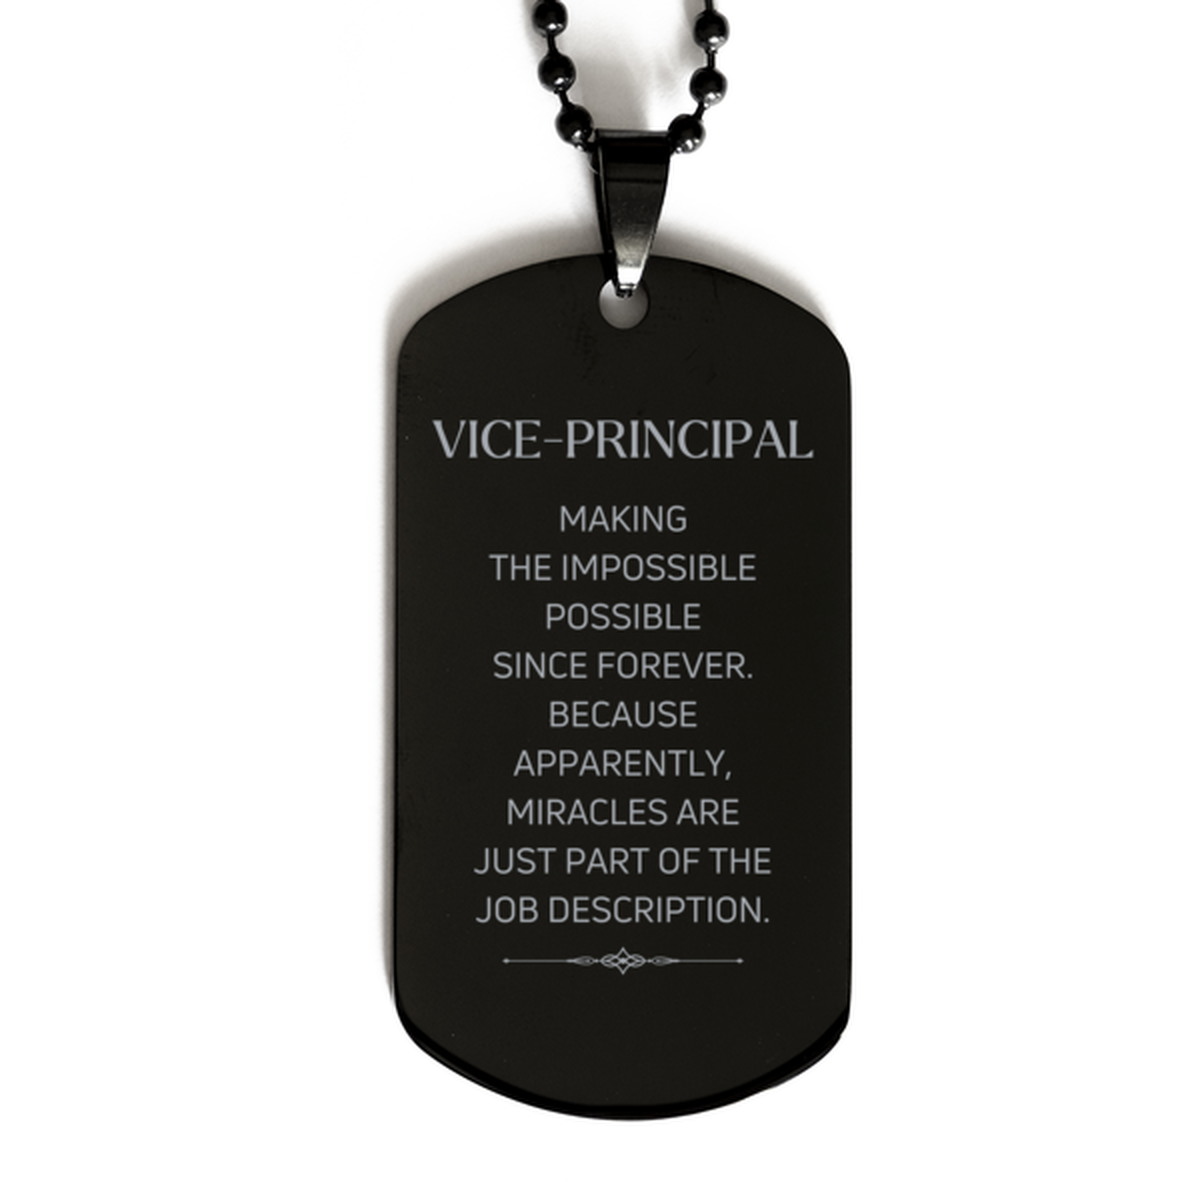 Funny Vice-principal Gifts, Miracles are just part of the job description, Inspirational Birthday Black Dog Tag For Vice-principal, Men, Women, Coworkers, Friends, Boss